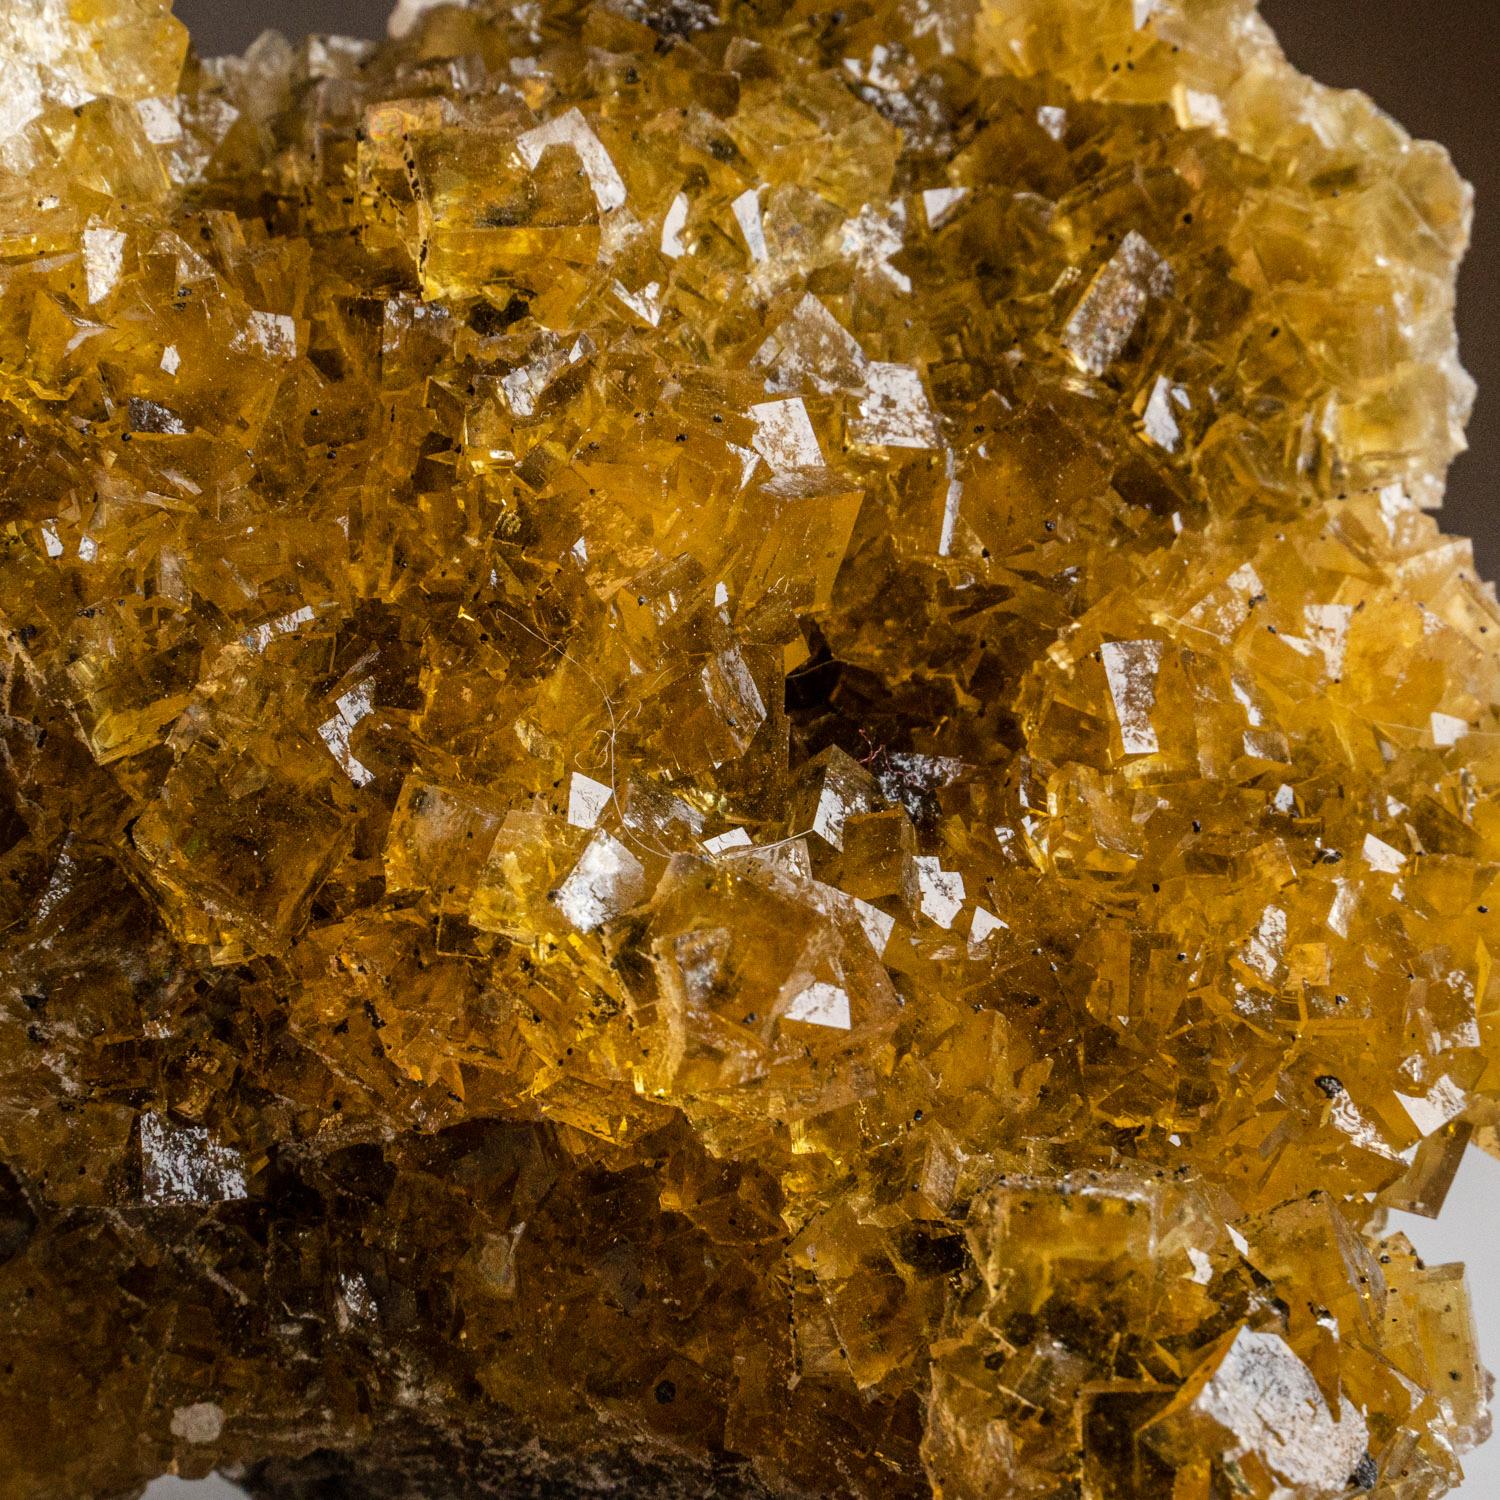 From Moscona Mine, Villabona District, Asturias, SpainAesthetic penetrating cubic formation of transparent to translucent golden yellow fluorite crystals on matrix. This specimen offers stunning visuals and reliable mineralogical integrity - a